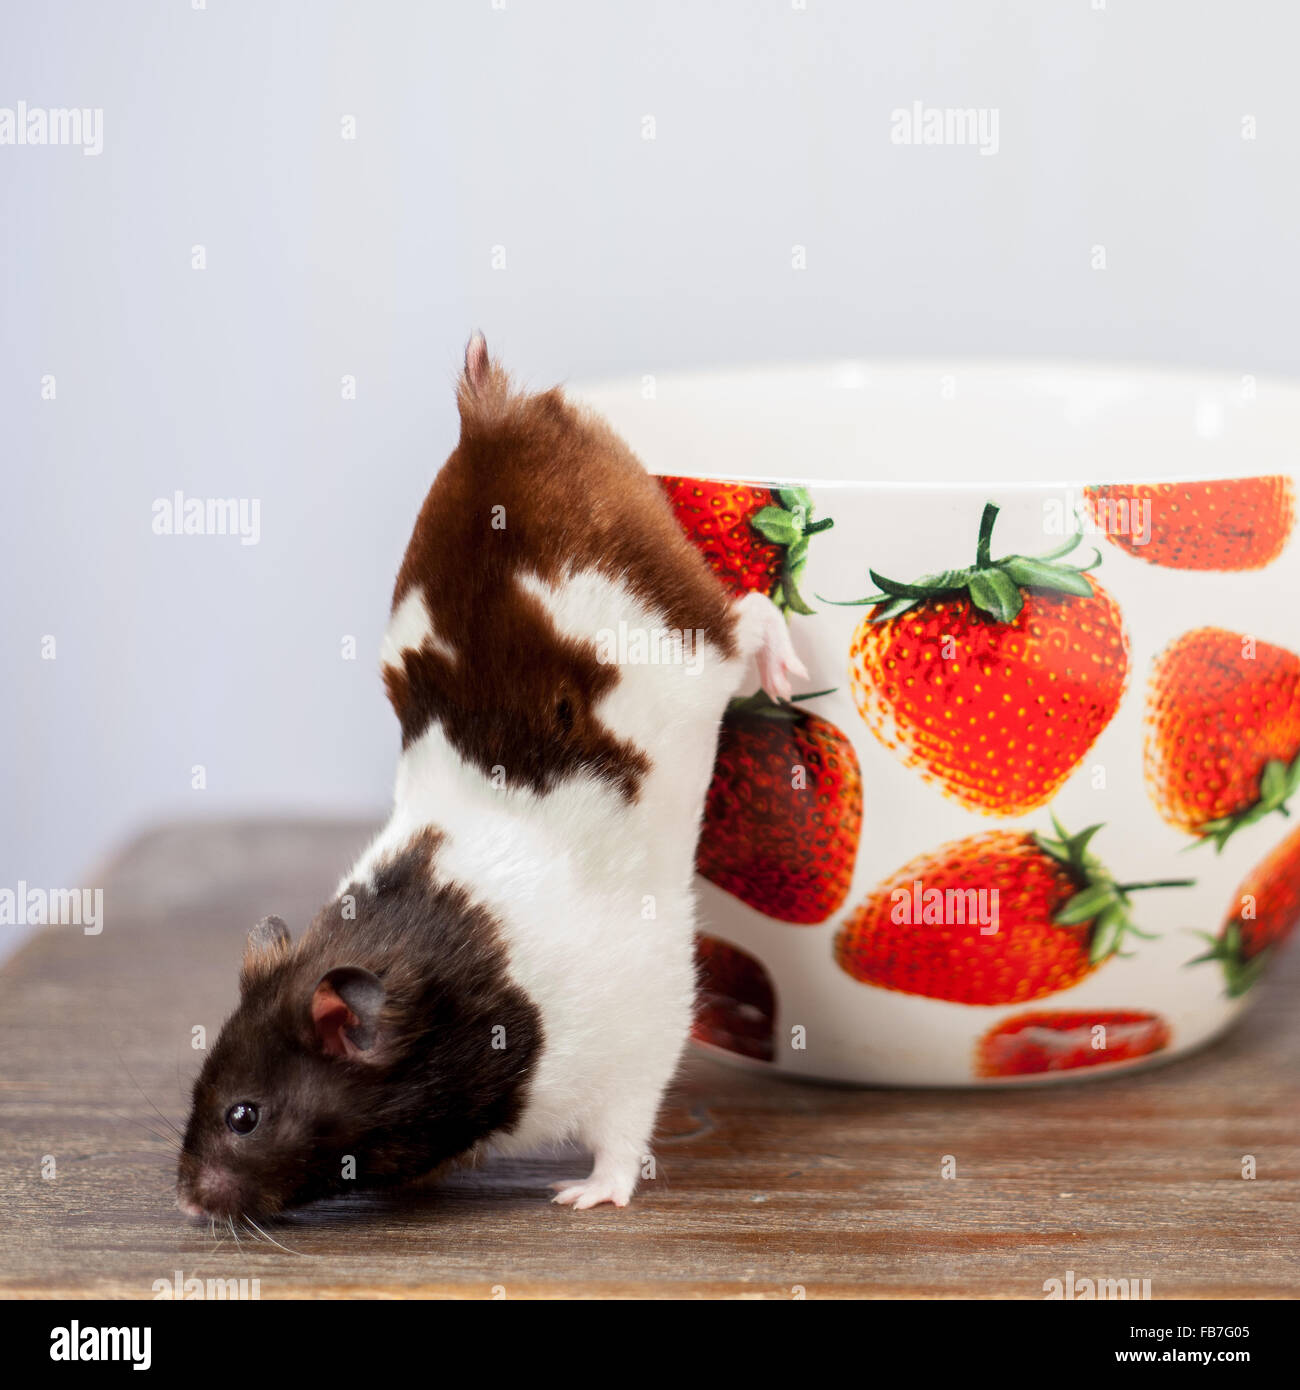 black and white syrian hamster climbing out of a strawberry patterned giant tea cup Stock Photo